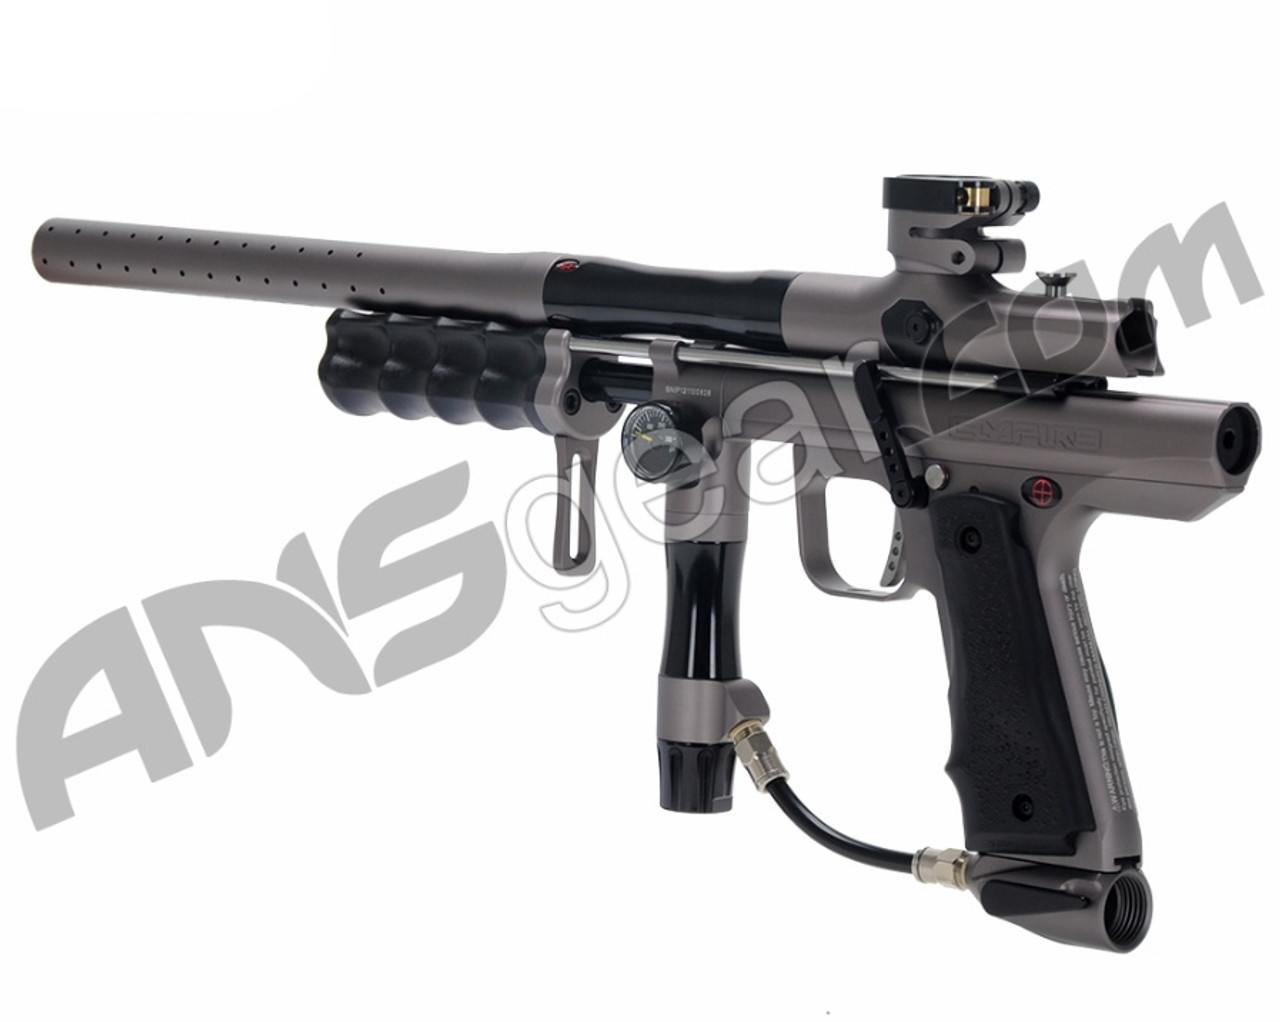 Giveaway: Empire Sniper Pump Paintball Marker - Social Paintball